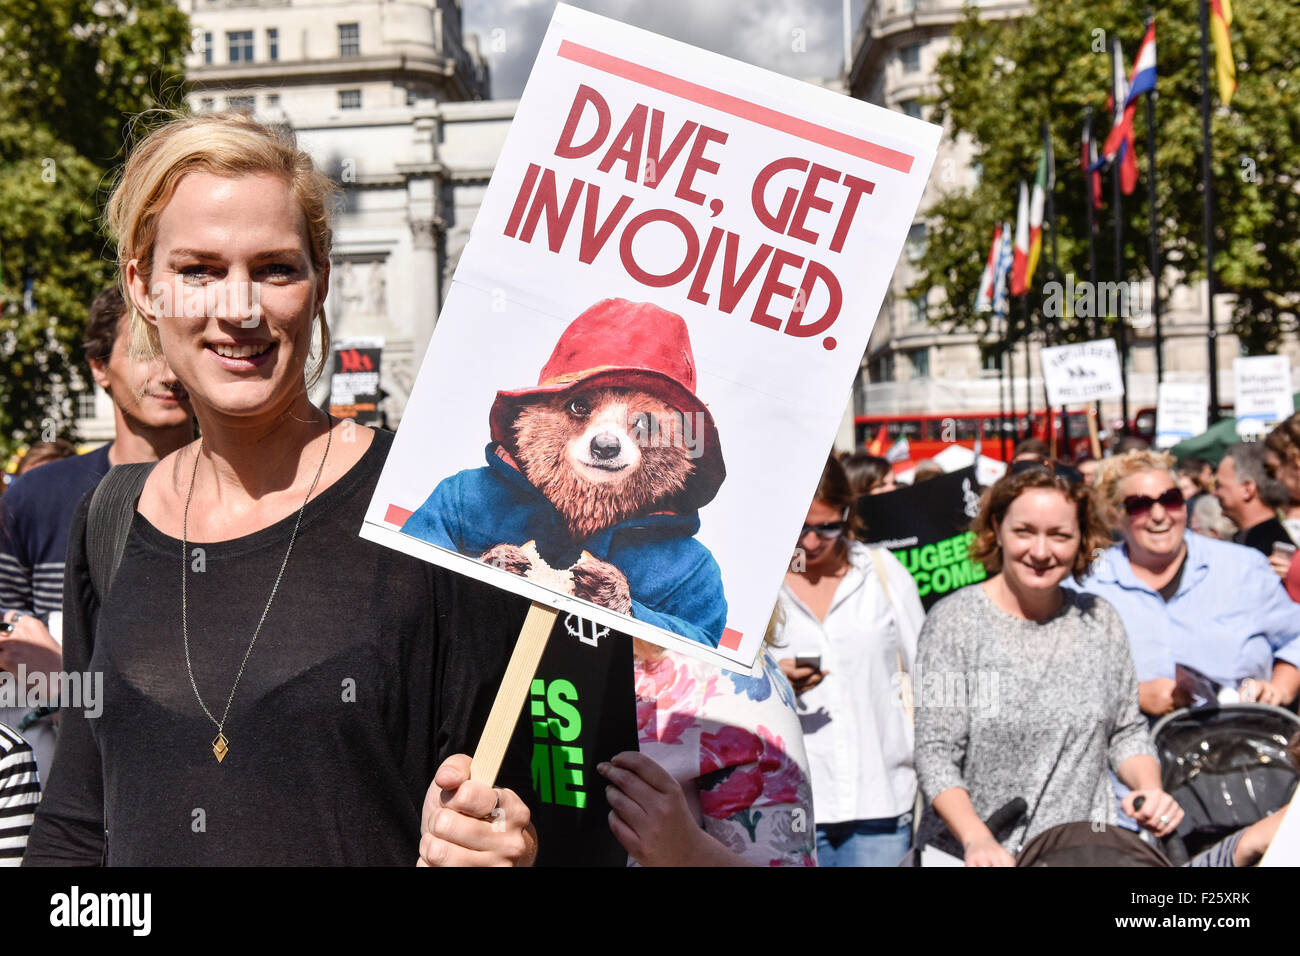 London, UK. 12th September 2015. As part of a national day of action many thousands of demonstrators march in support of refugees.  Credit: Gordon Scammell/Alamy Live News Stock Photo